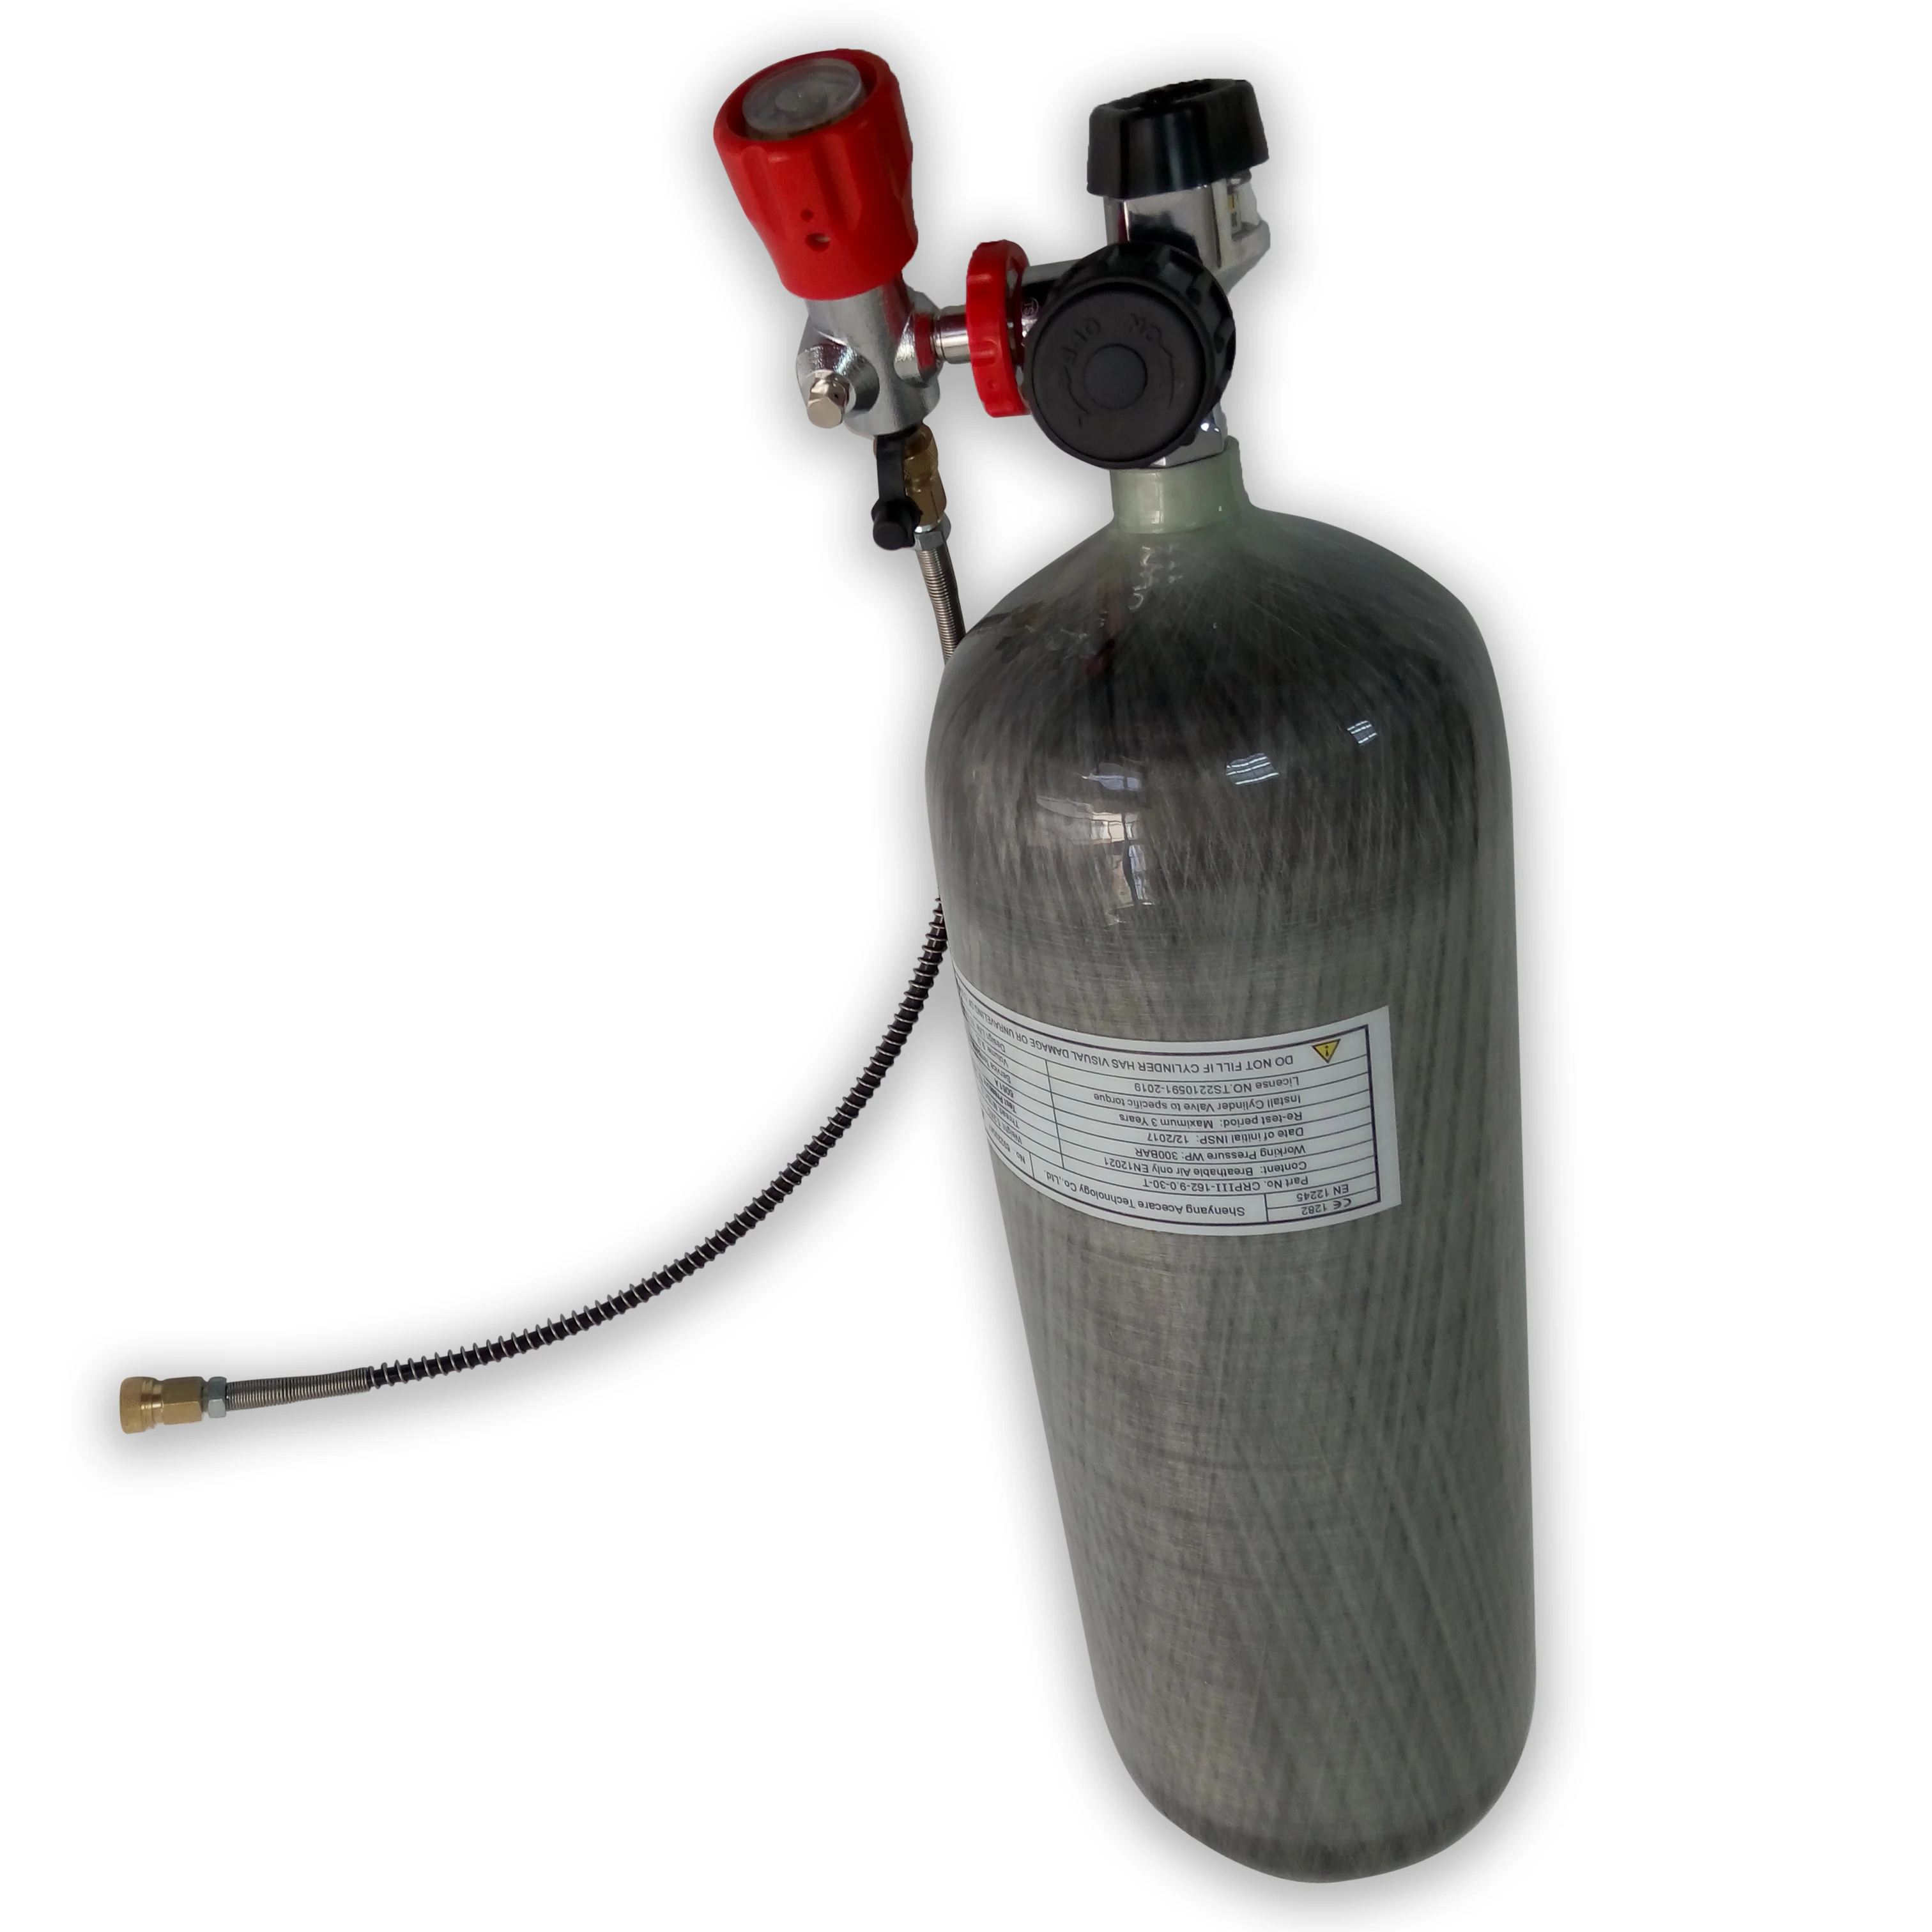 

9L 30Mpa 4500psi Carbon Fiber Composite Gas Cylinder SCUBA Tank PCP Airgun Refill With Valve And Filling Station, Gray